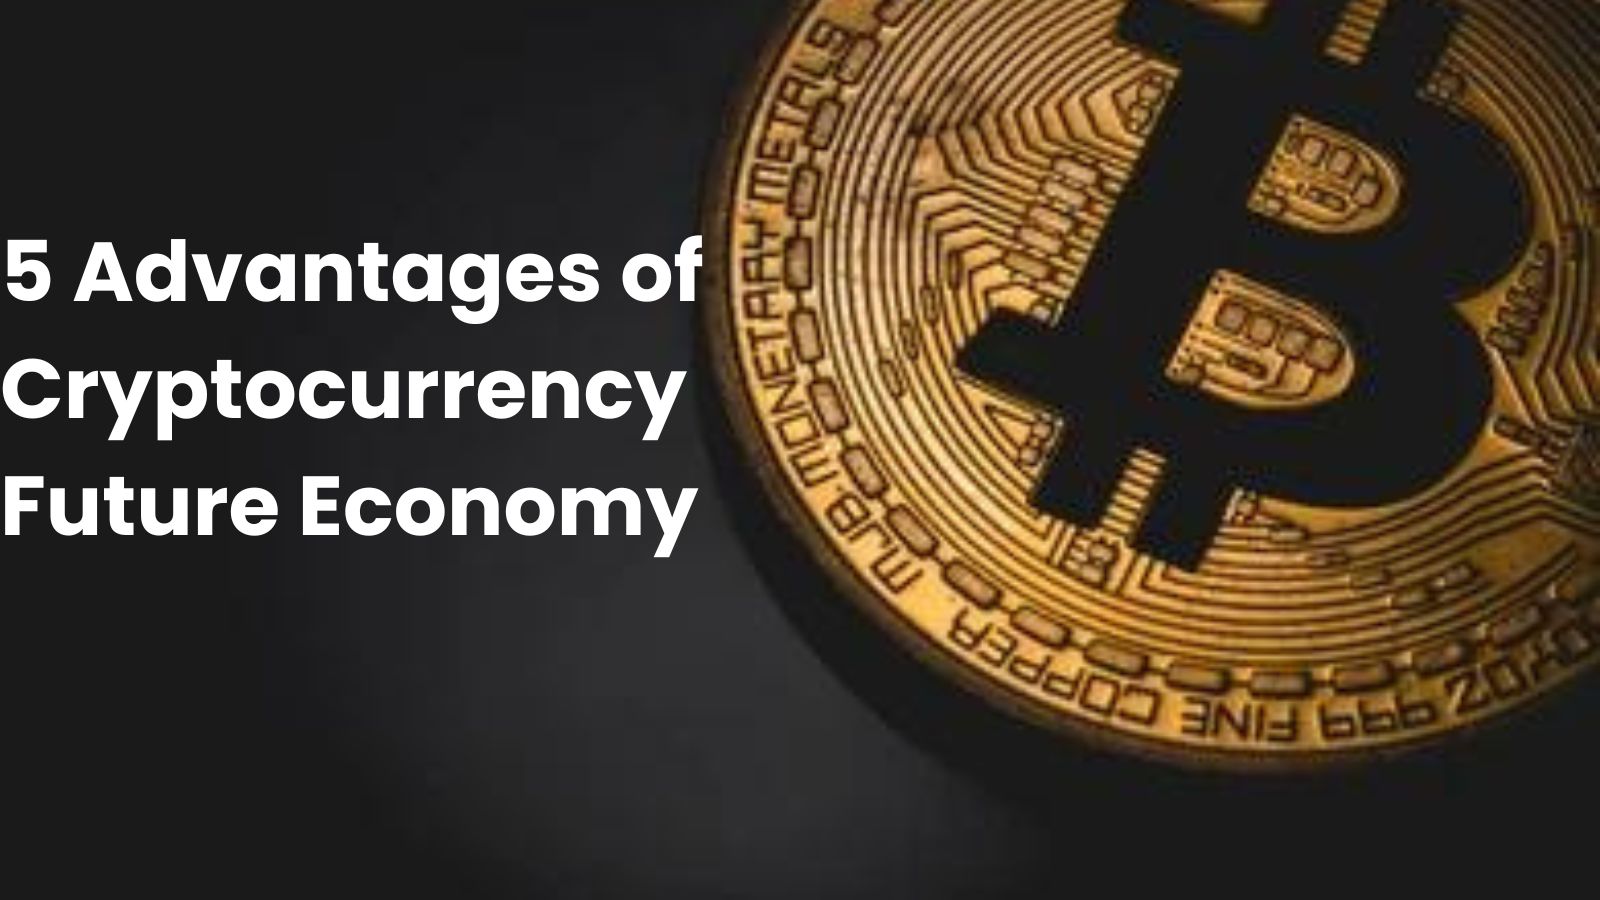 5 Advantages of Cryptocurrency: Future Economy